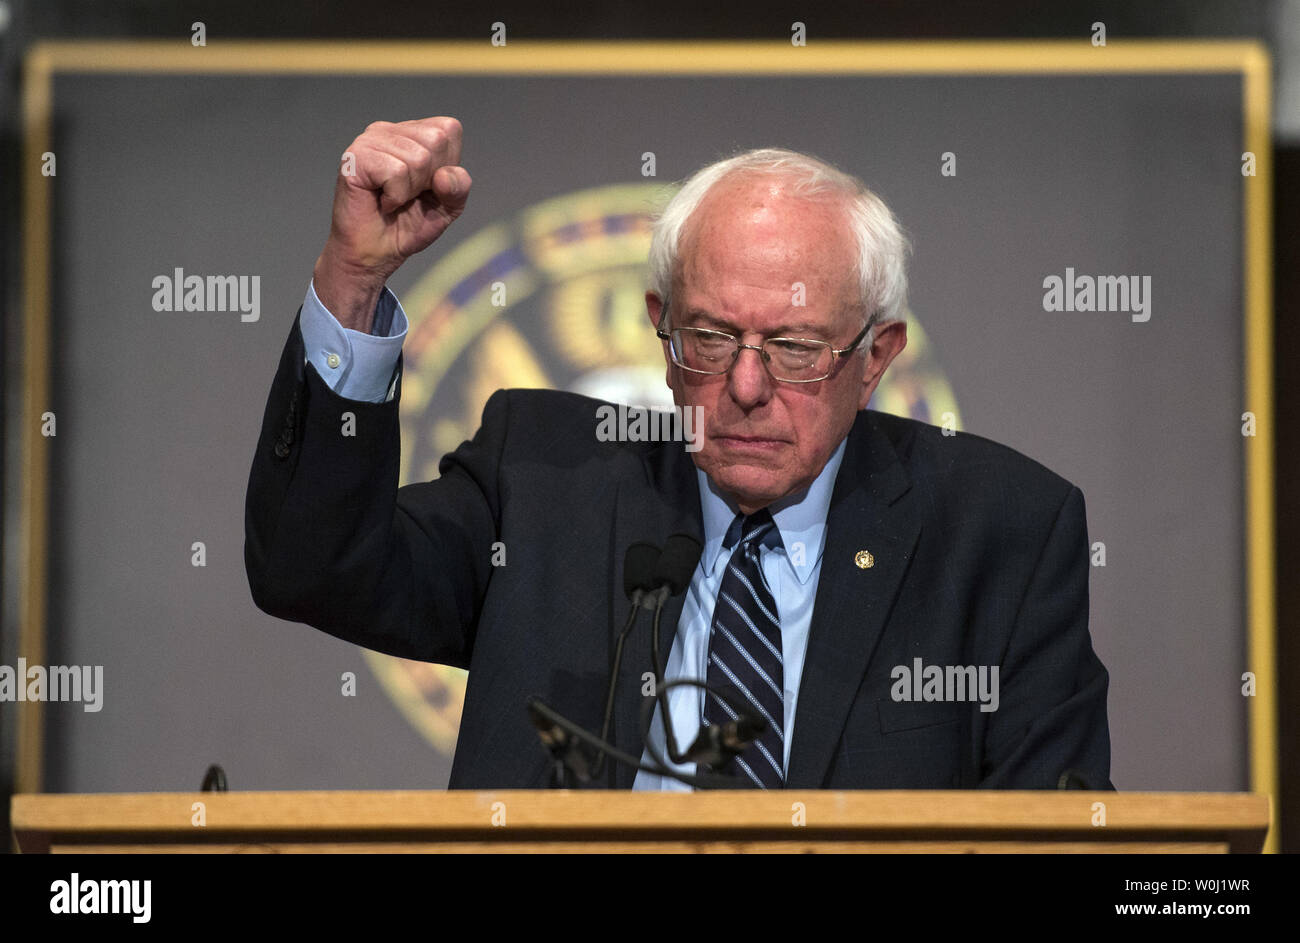 Presidential hopeful Sen. Bernie Sanders (I-VT) speaks on Democratic Socialism as he outlines his presidential agenda at Georgetown University in Washington, D.C. on November 19, 2015.  Sanders spoke about the widening income gap, America's high prison population and higher education. Photo by Kevin Dietsch/UPI Stock Photo